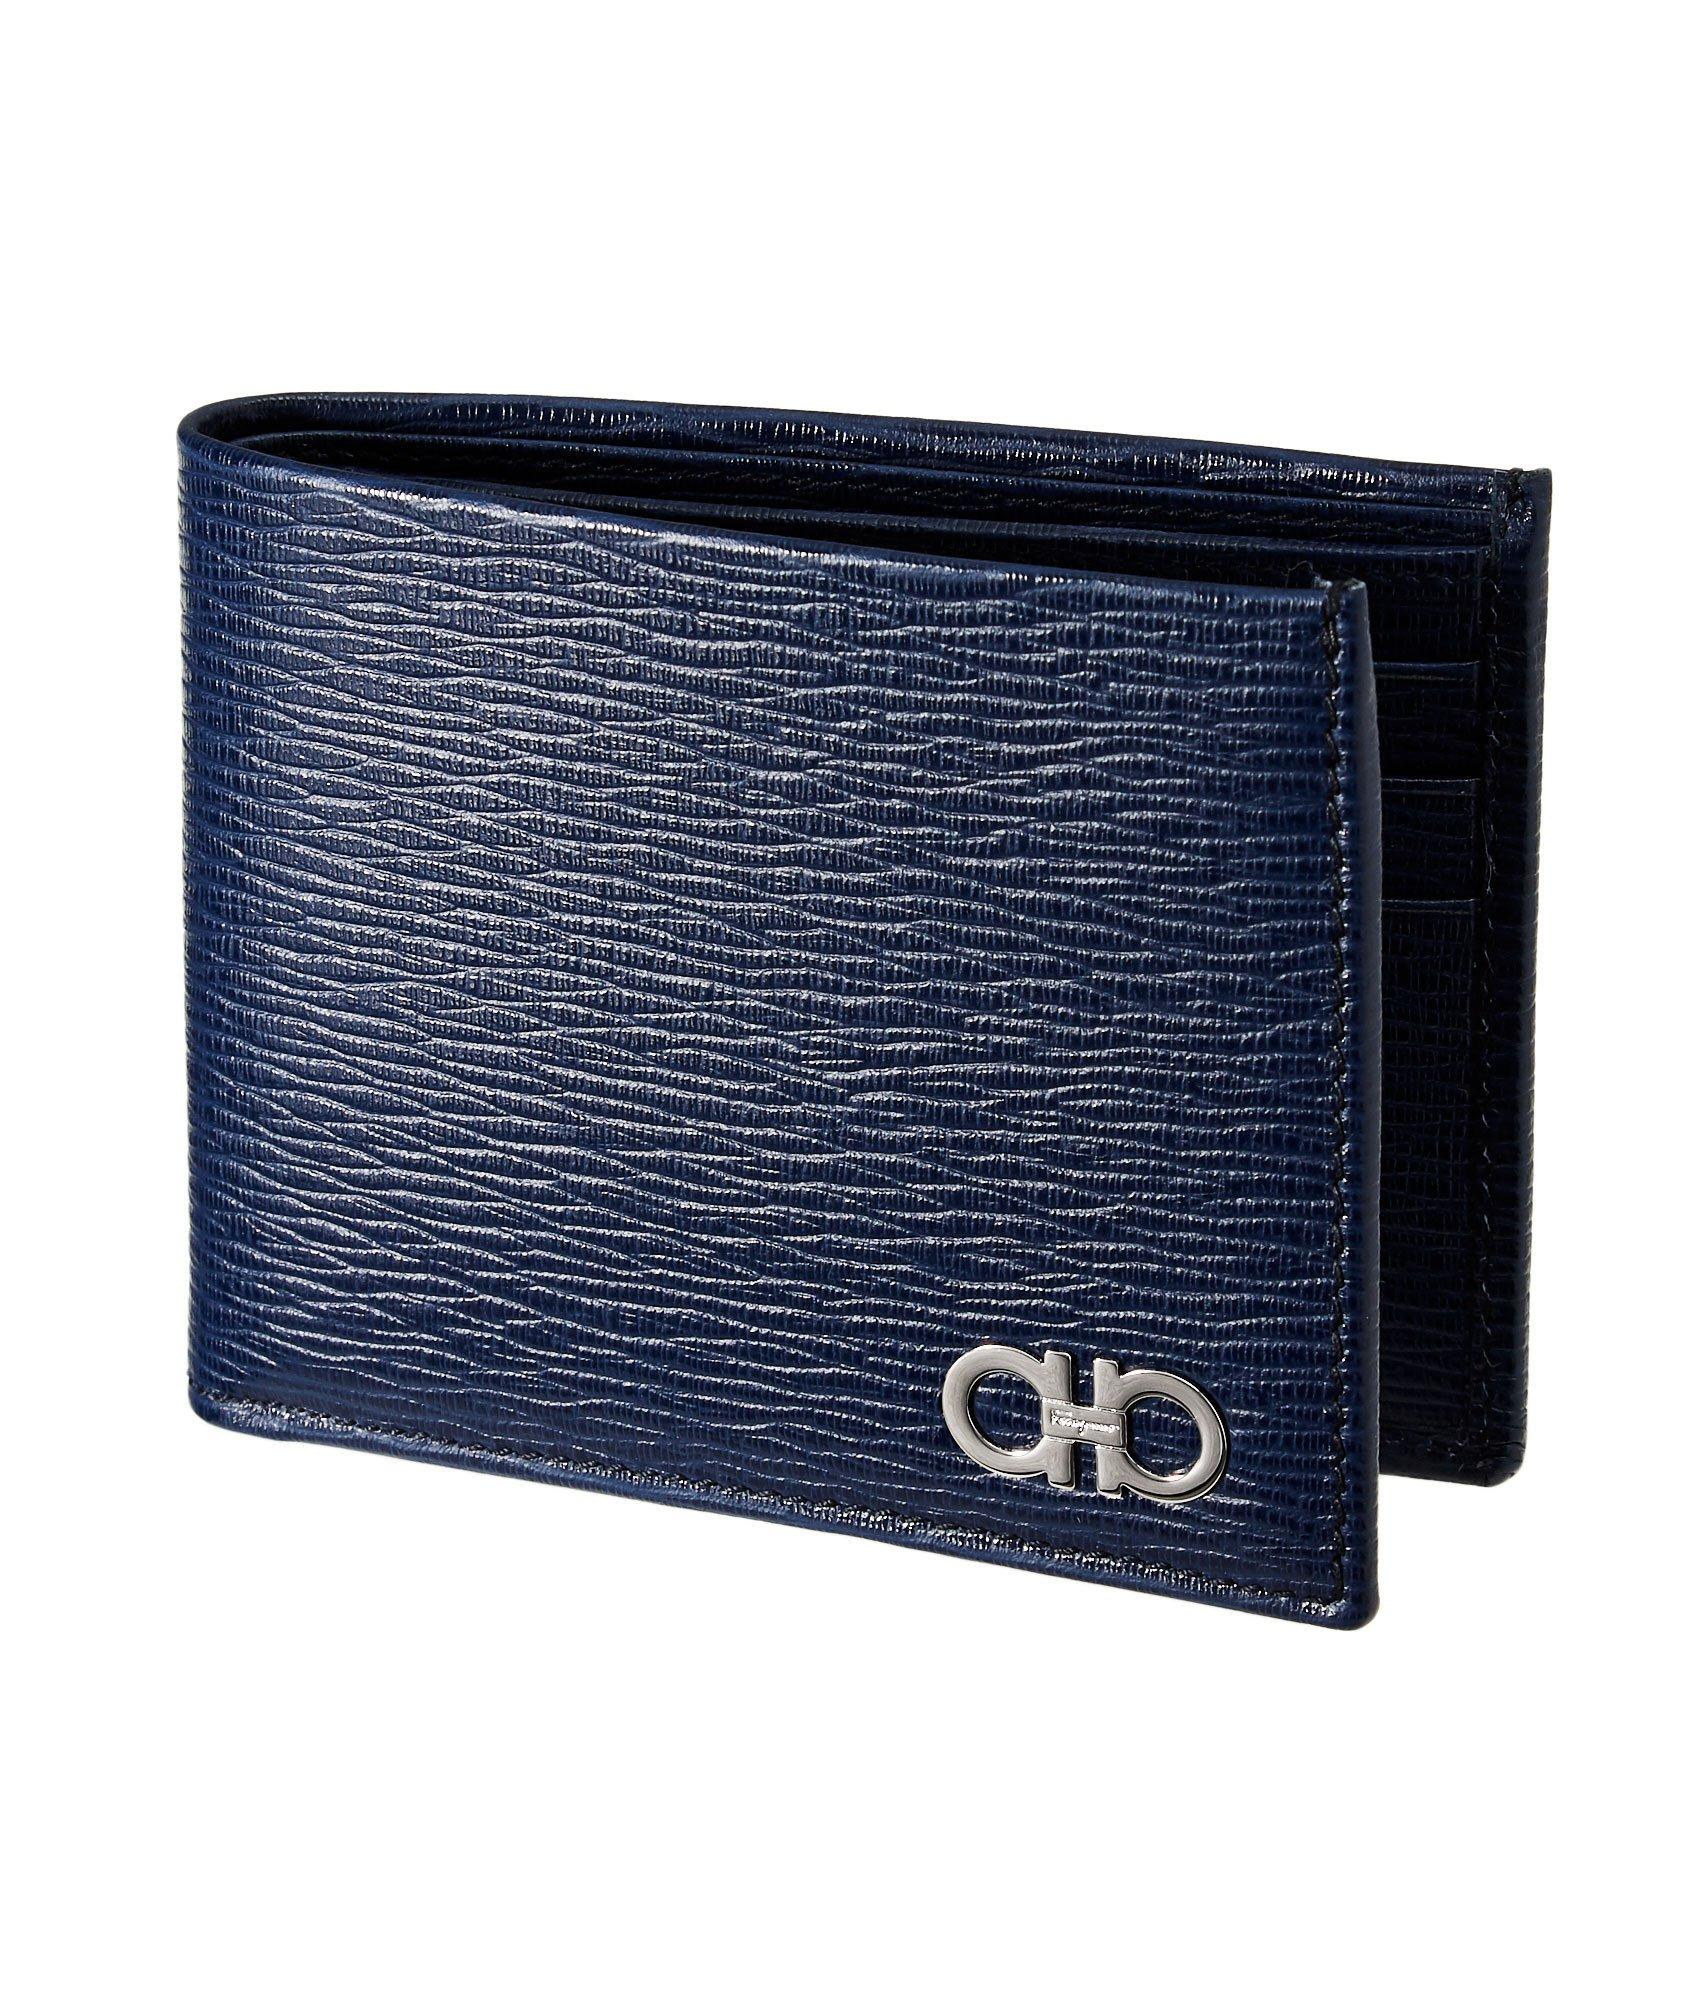 Textured Leather Wallet image 0